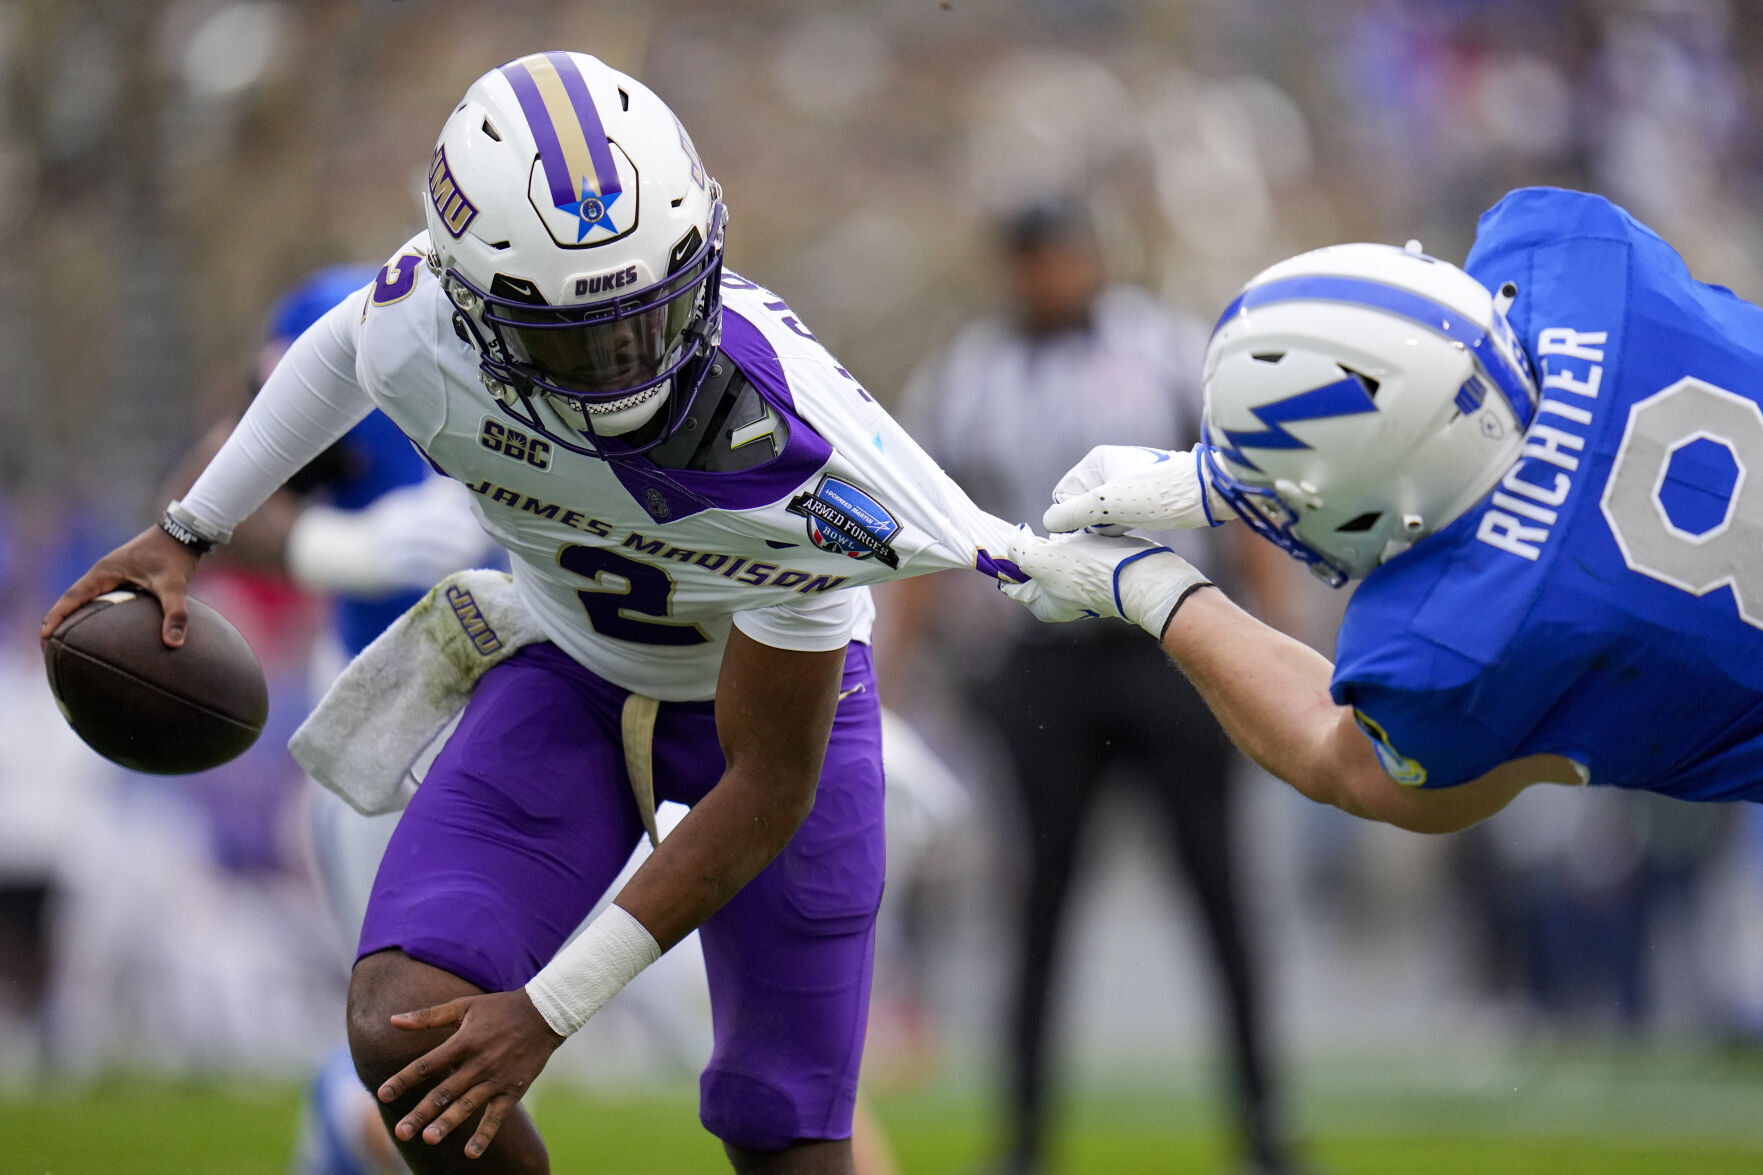 Air Force secures Armed Forces Bowl with 31-21 victory over James Madison